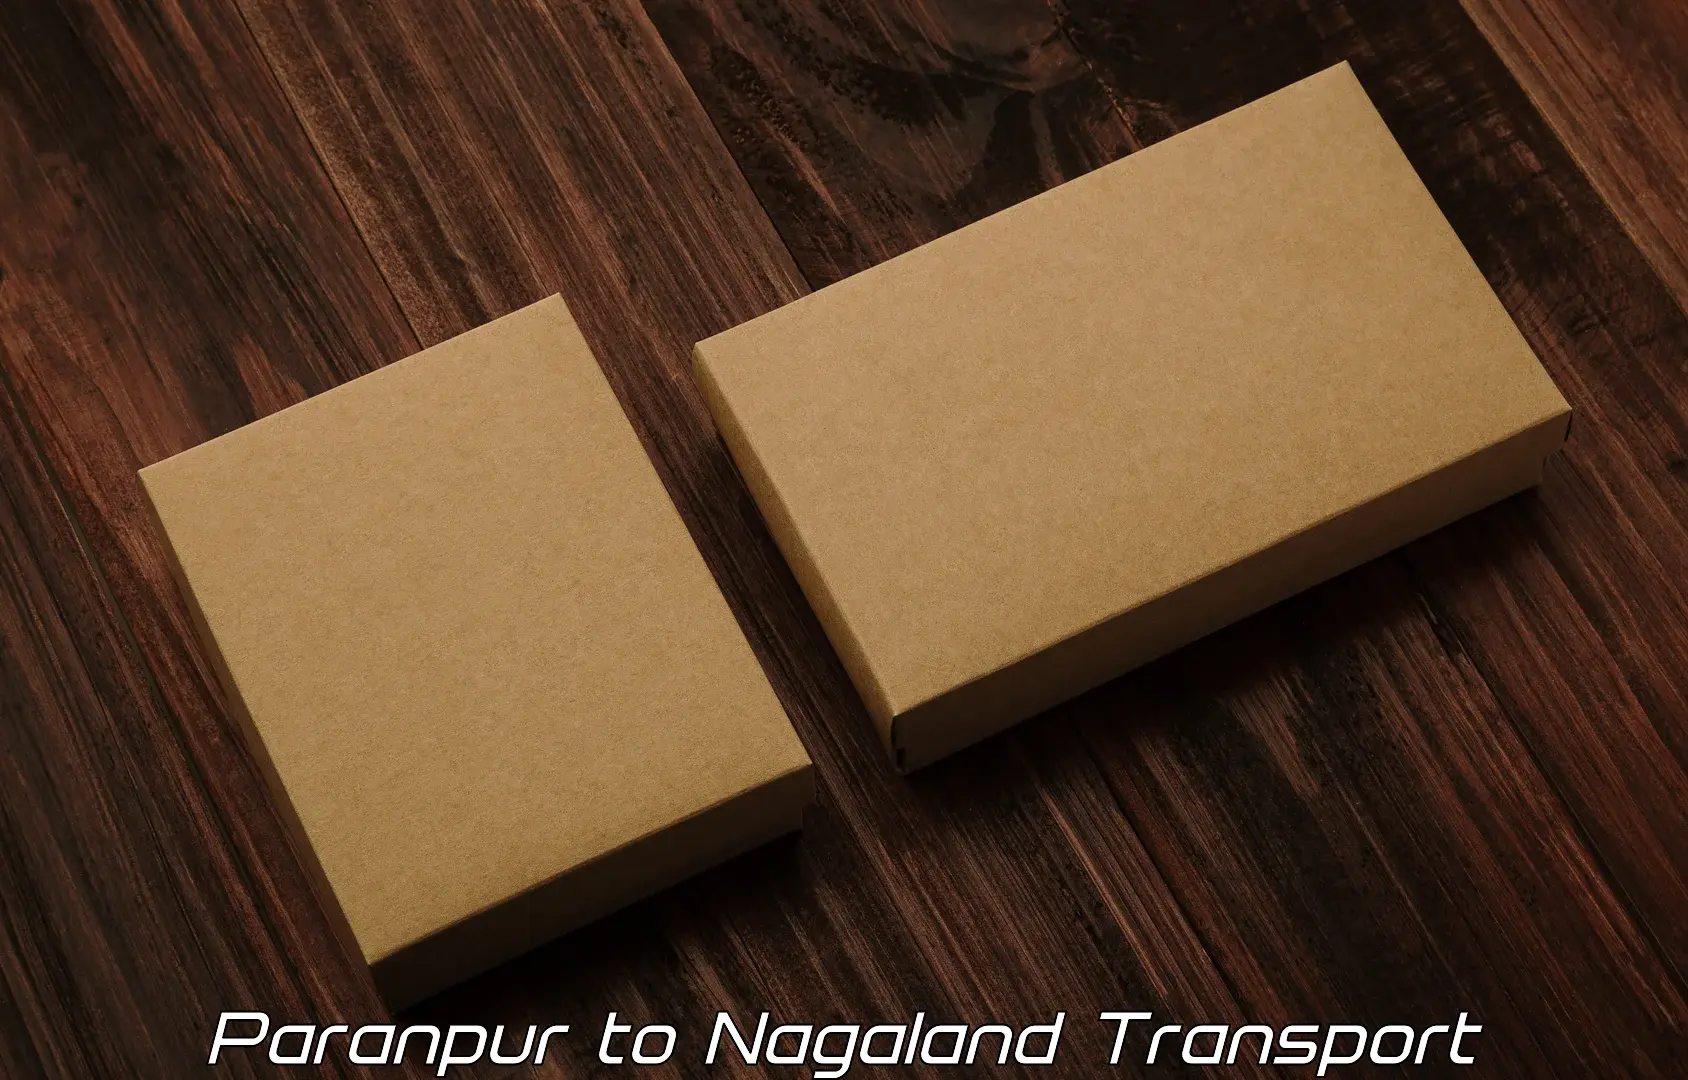 Container transport service Paranpur to Nagaland